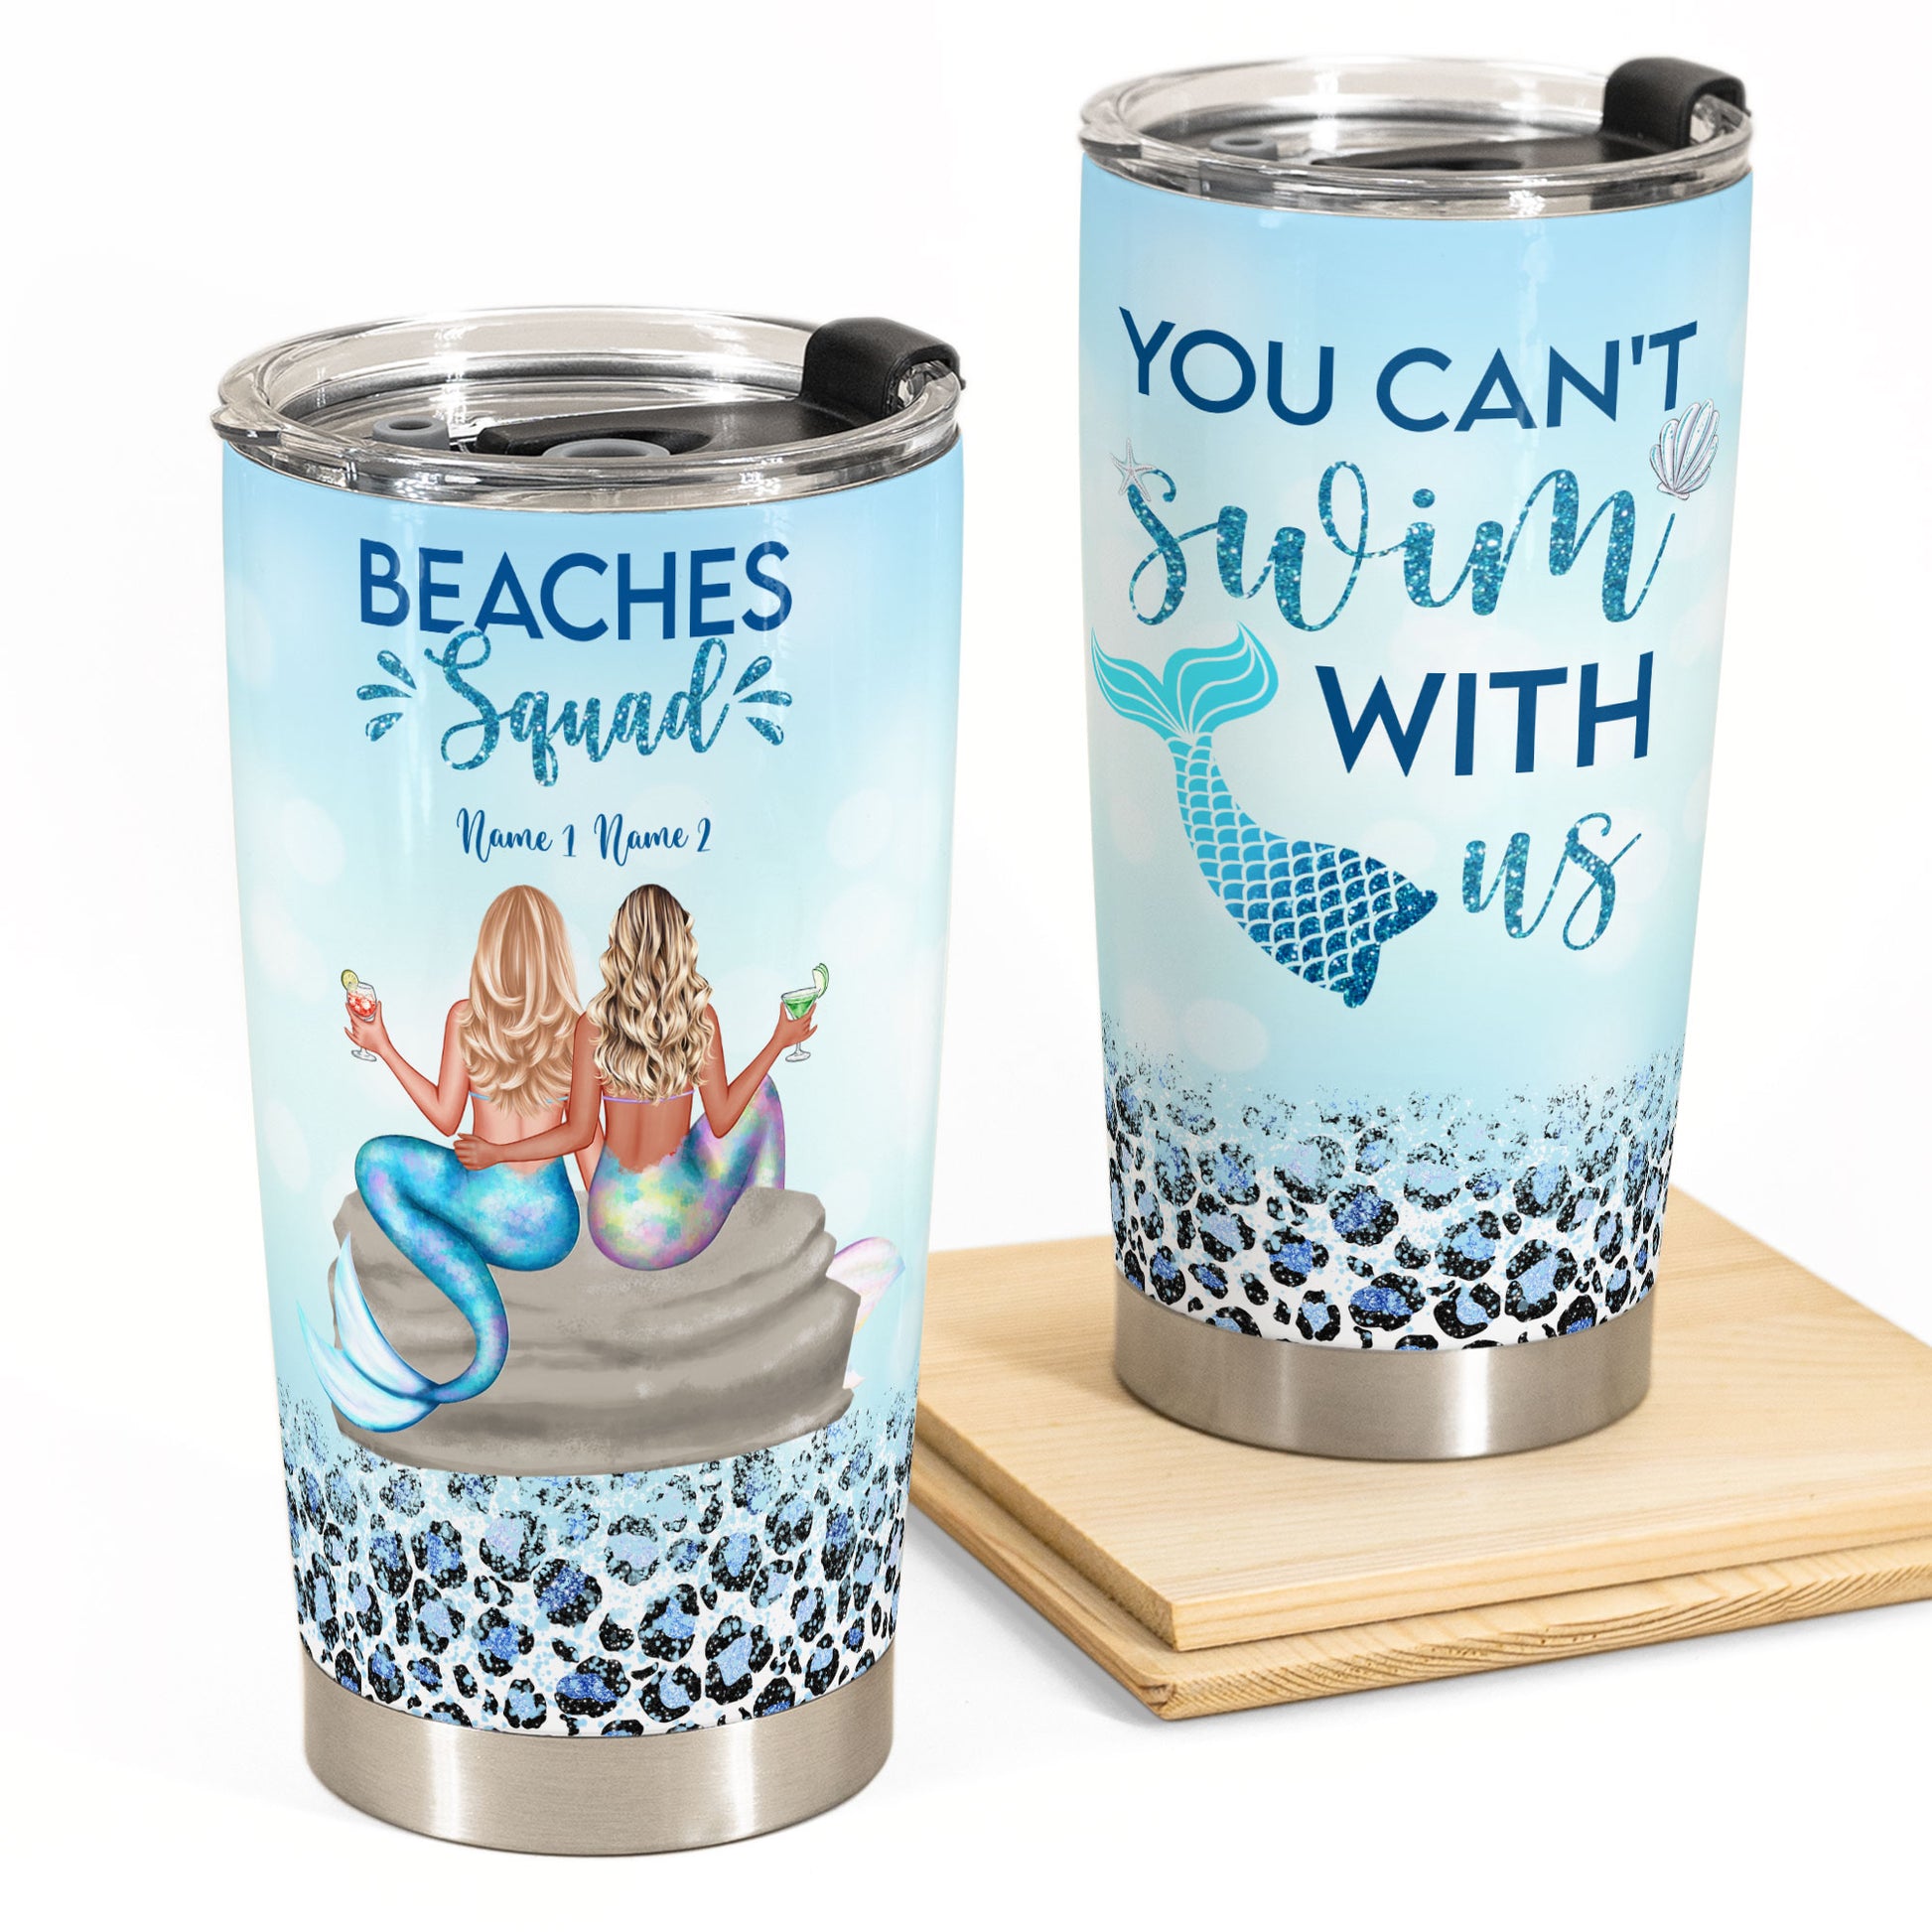 You Can't Swim With Us - Personalized Tumbler Cup - Gift For Friends, Besties, Mermaid, Partying